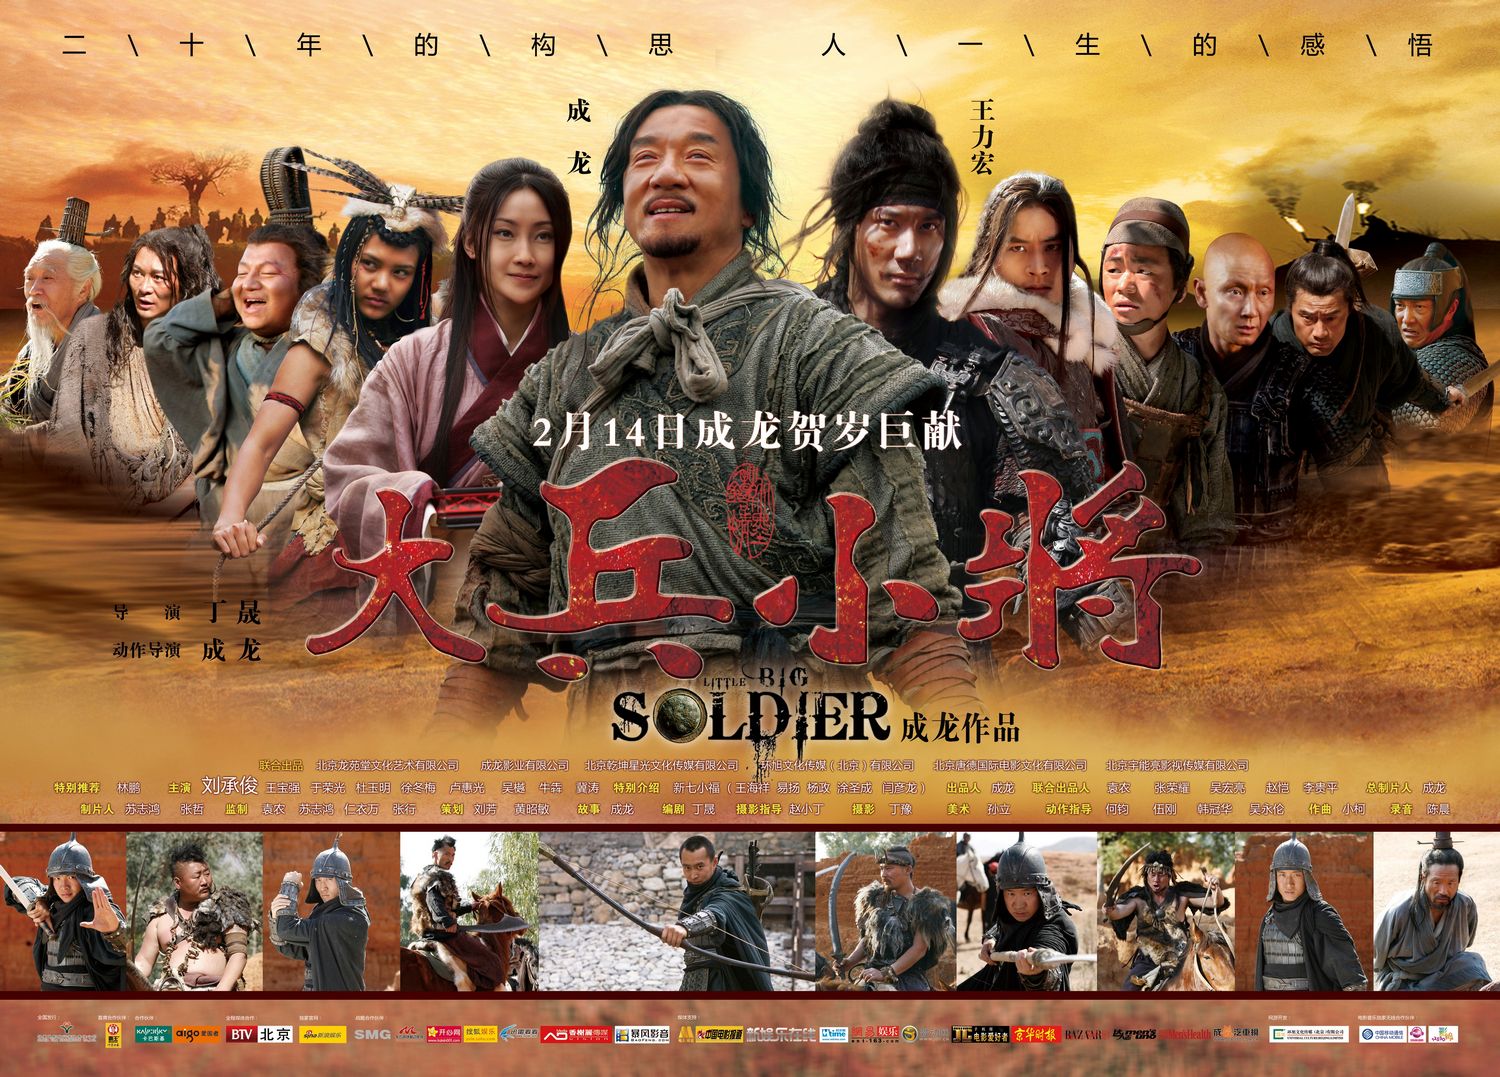 Extra Large Movie Poster Image for Little Big Soldier (#2 of 3)